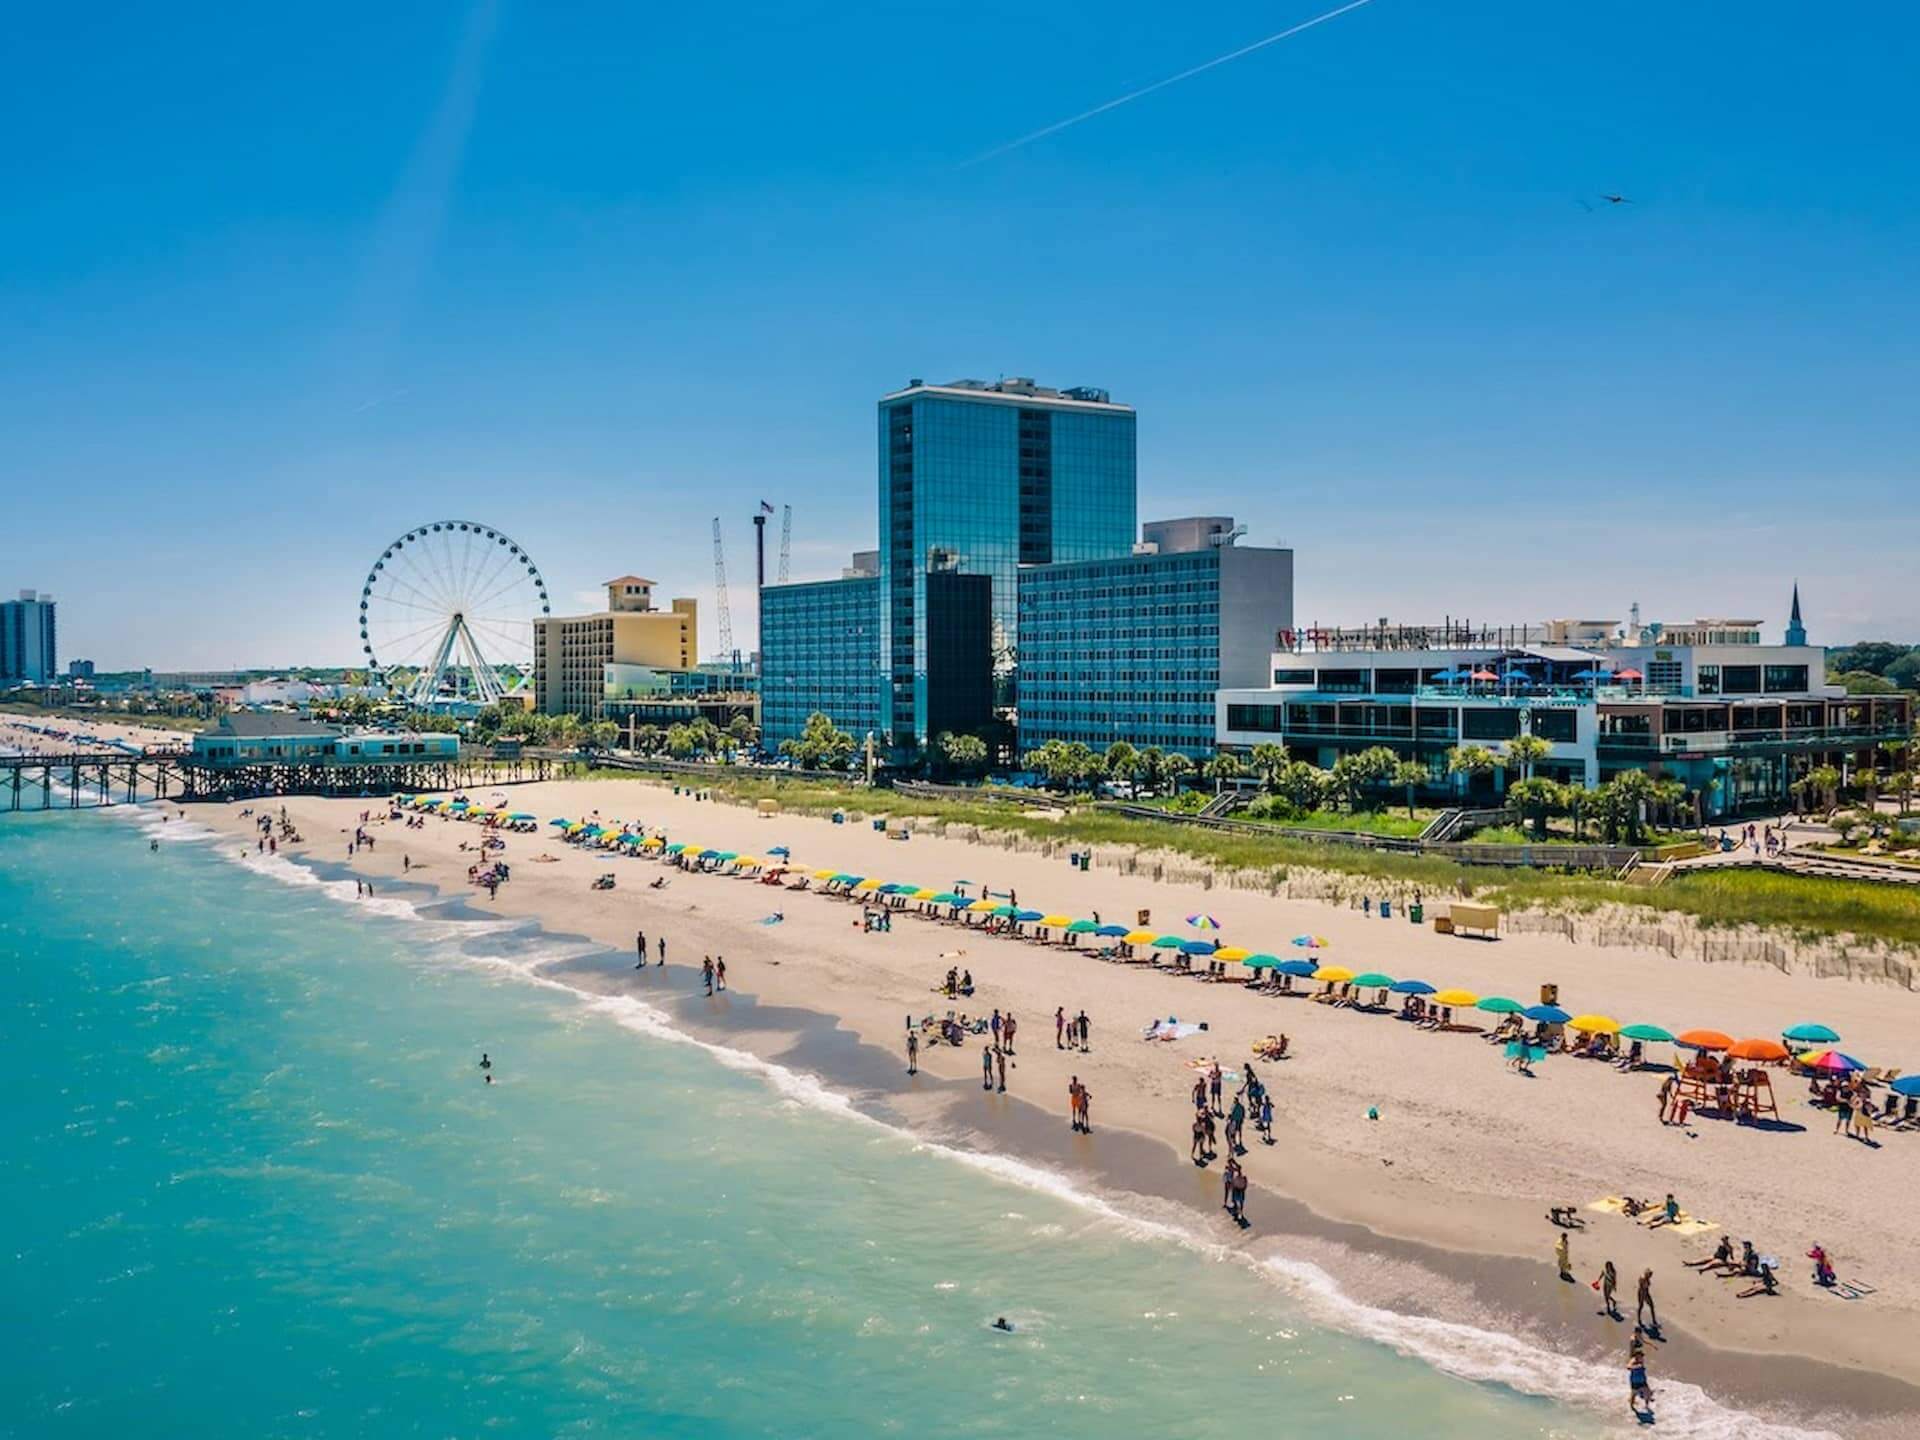 Sun, Sand, & South Carolina Charm: 15 Things to Do in Myrtle Beach